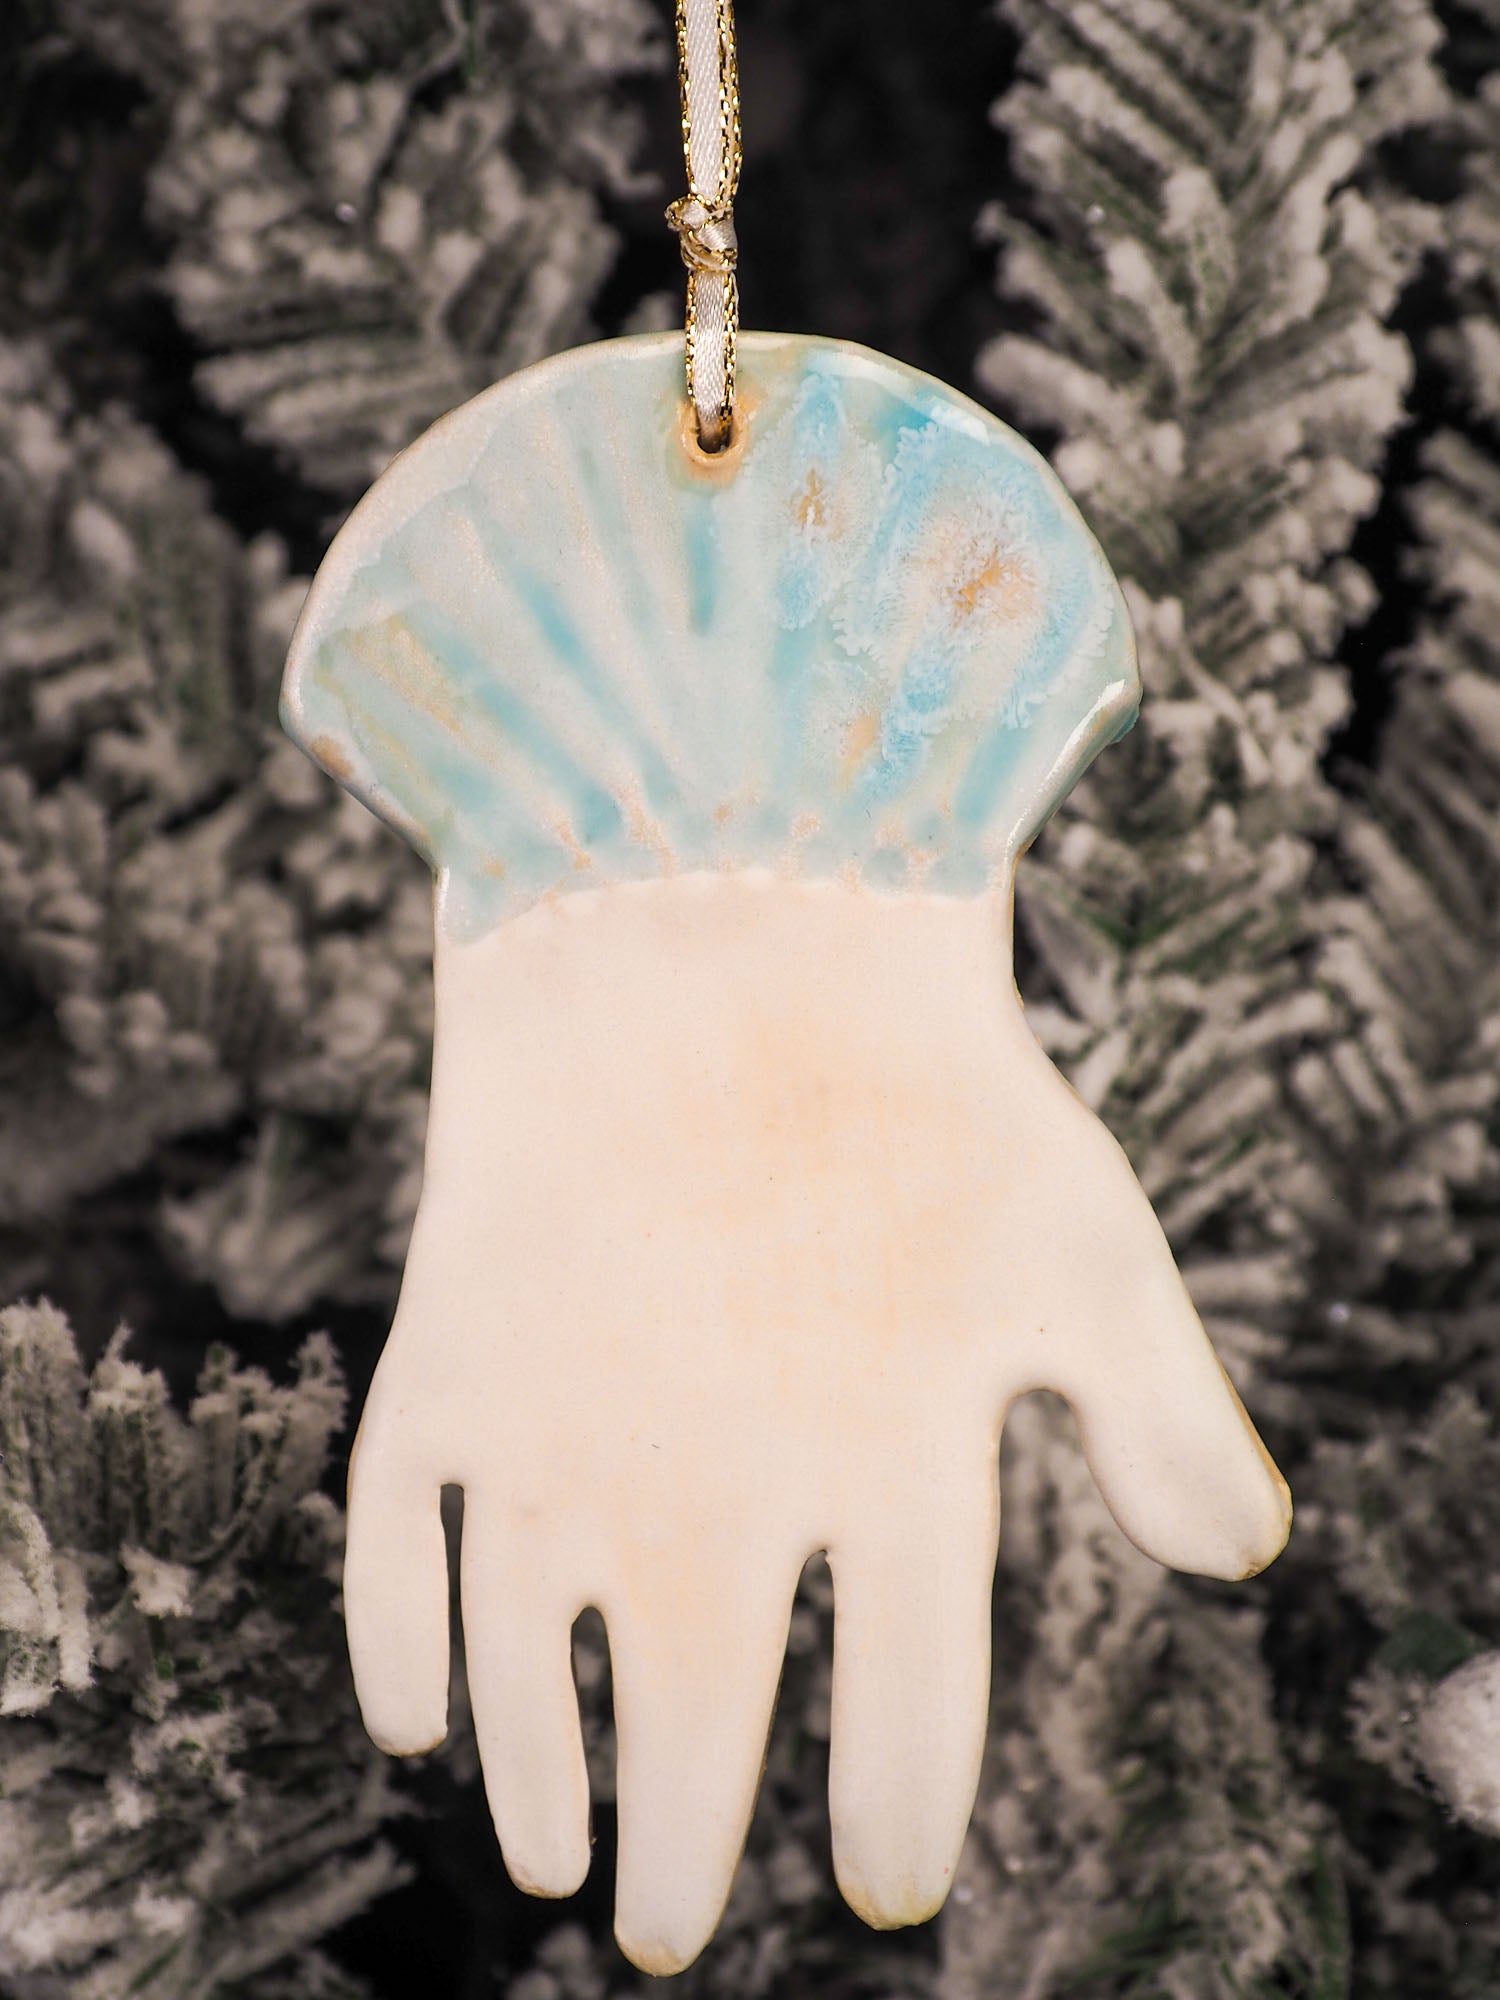 An original Christmas Holiday tree round glazed ceramic hanging ornament handmade by Idania Salcido, the artist behind Danita Art. Glazed carved sgraffito stoneware, hand painted and decorated, it is a beautiful victorian hand in vintage style with matte and glossy glass glaze, totally hand made.